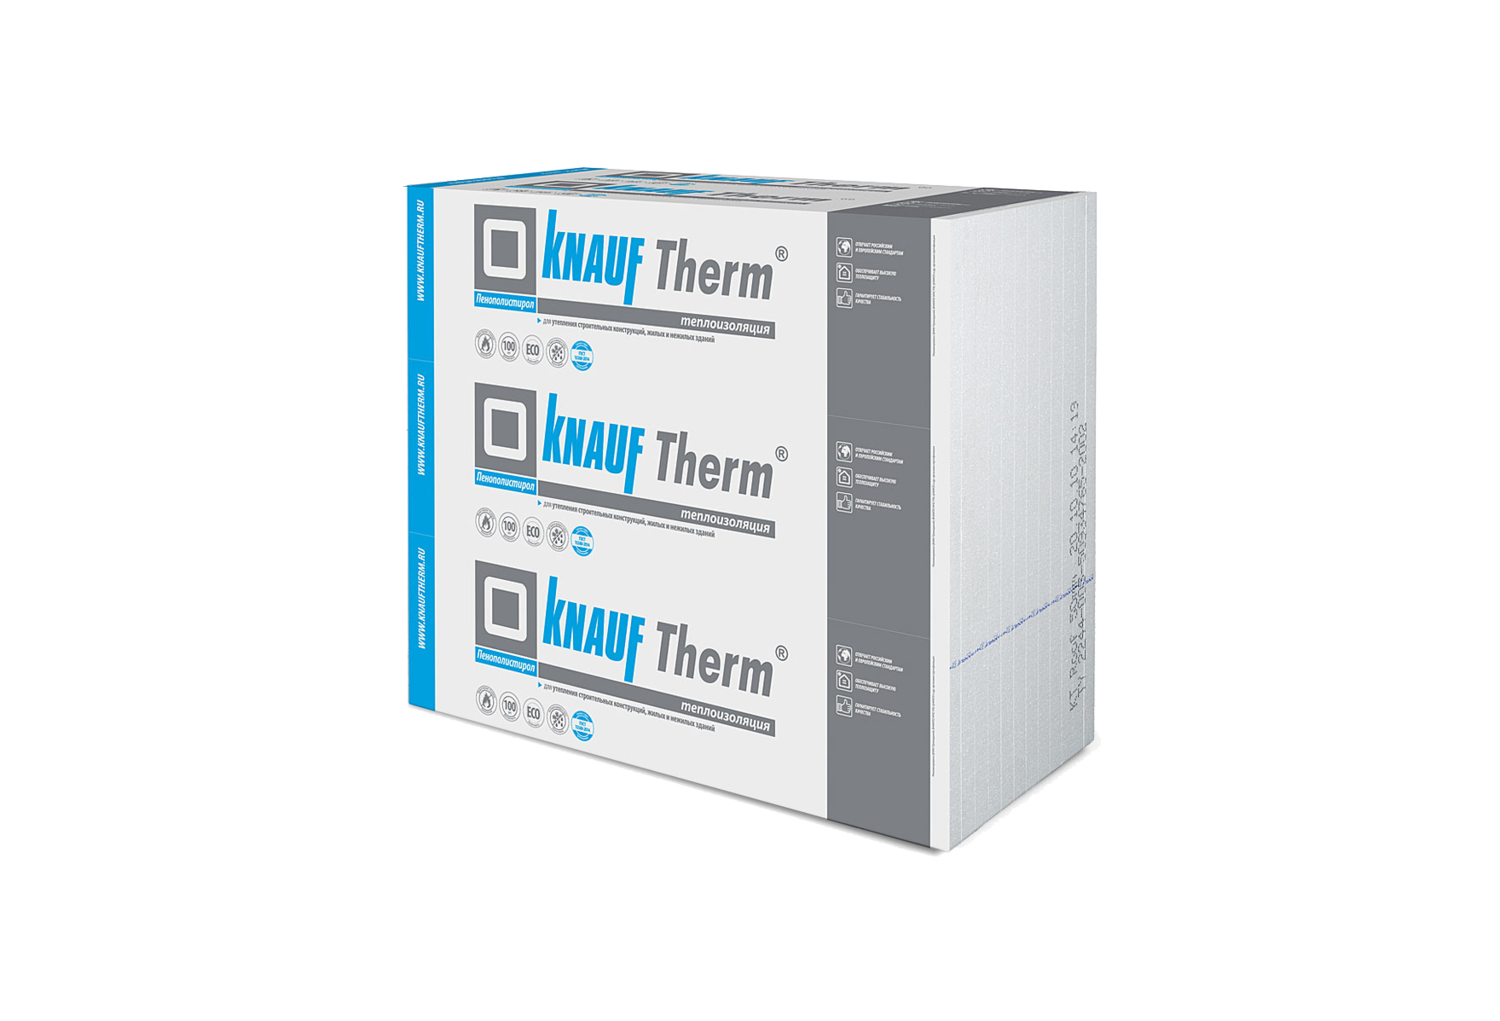 <span style="font-weight: bold;">KNAUF Therm® ДАЧА</span><br>